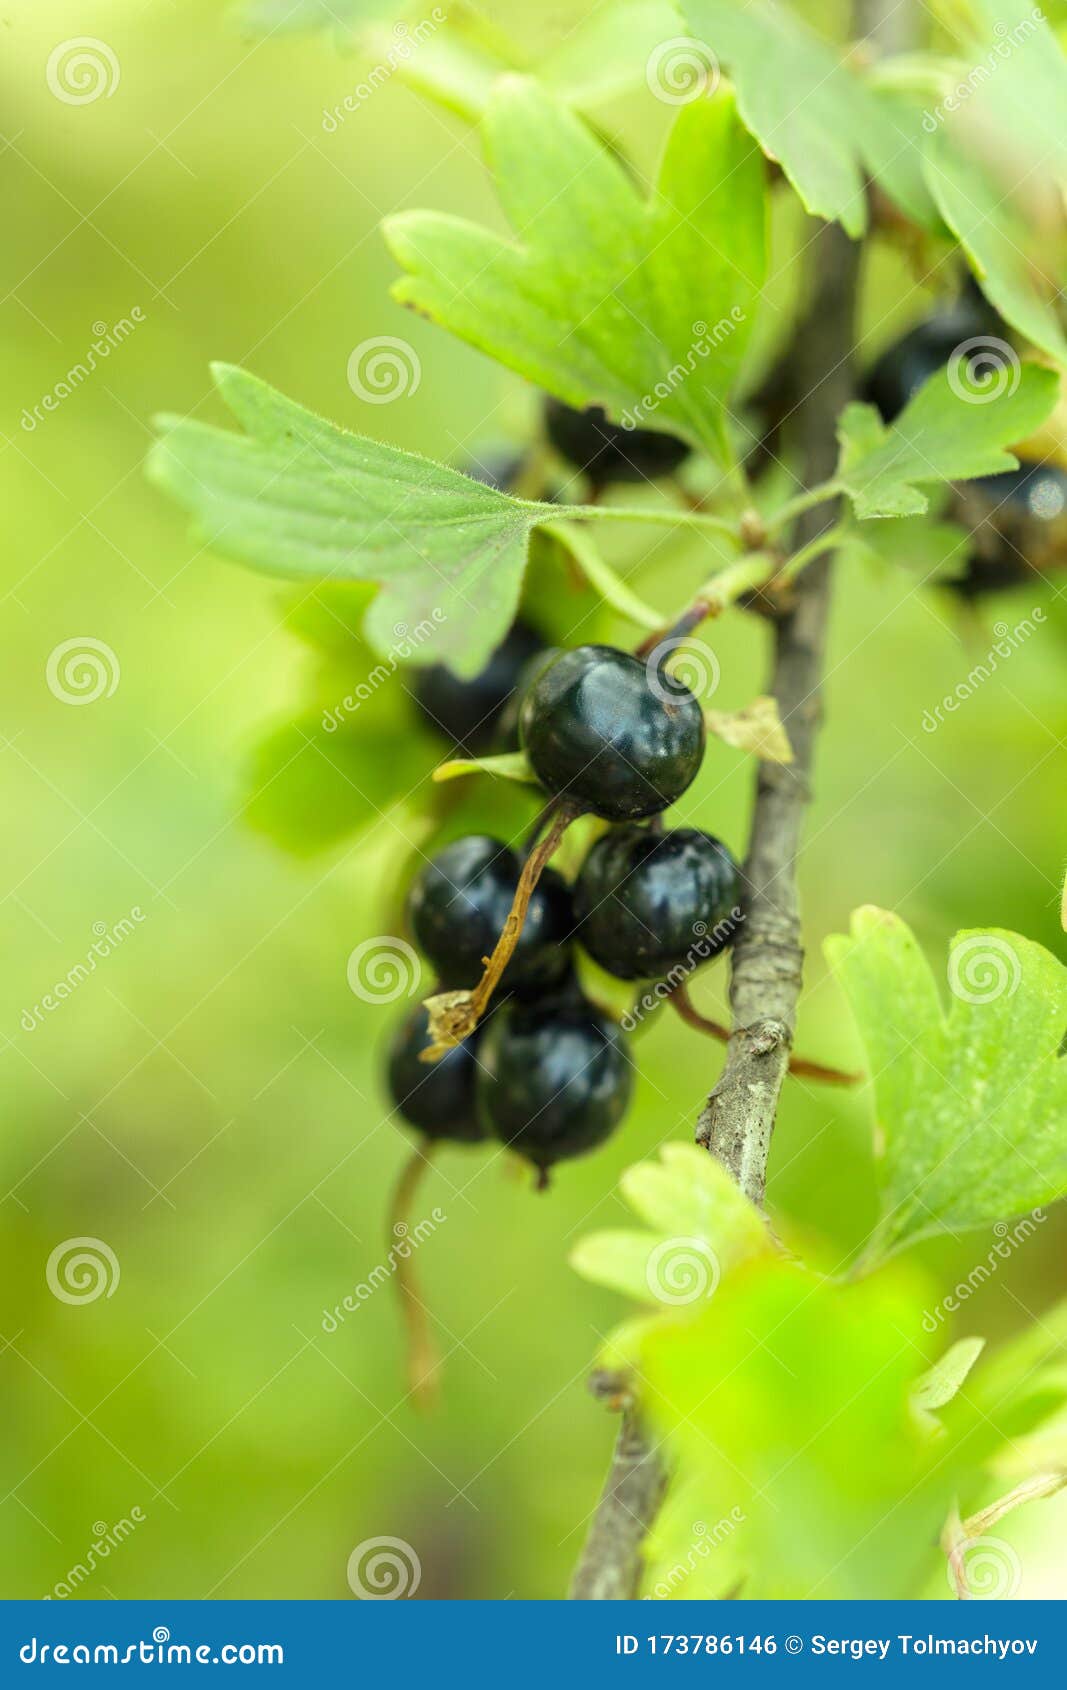 the black currant berries on a bush close-up